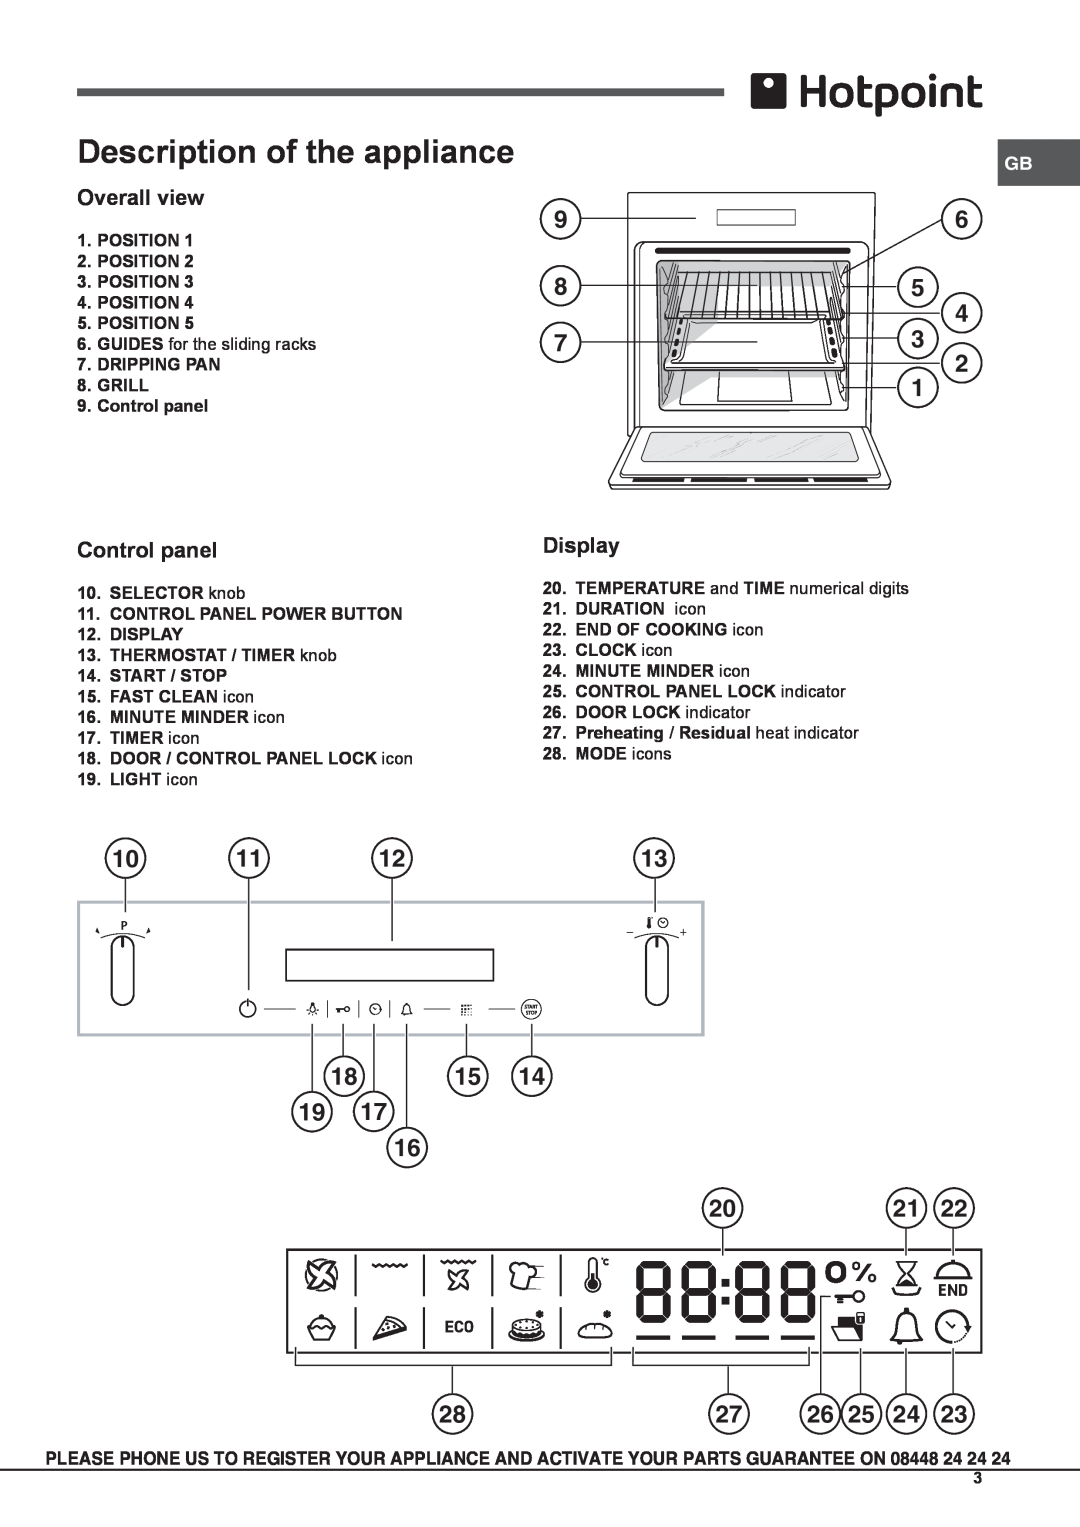 Hotpoint SX 896 PX S Description of the appliance, Overall view, Control panel, Display, Position, Dripping Pan, Grill 